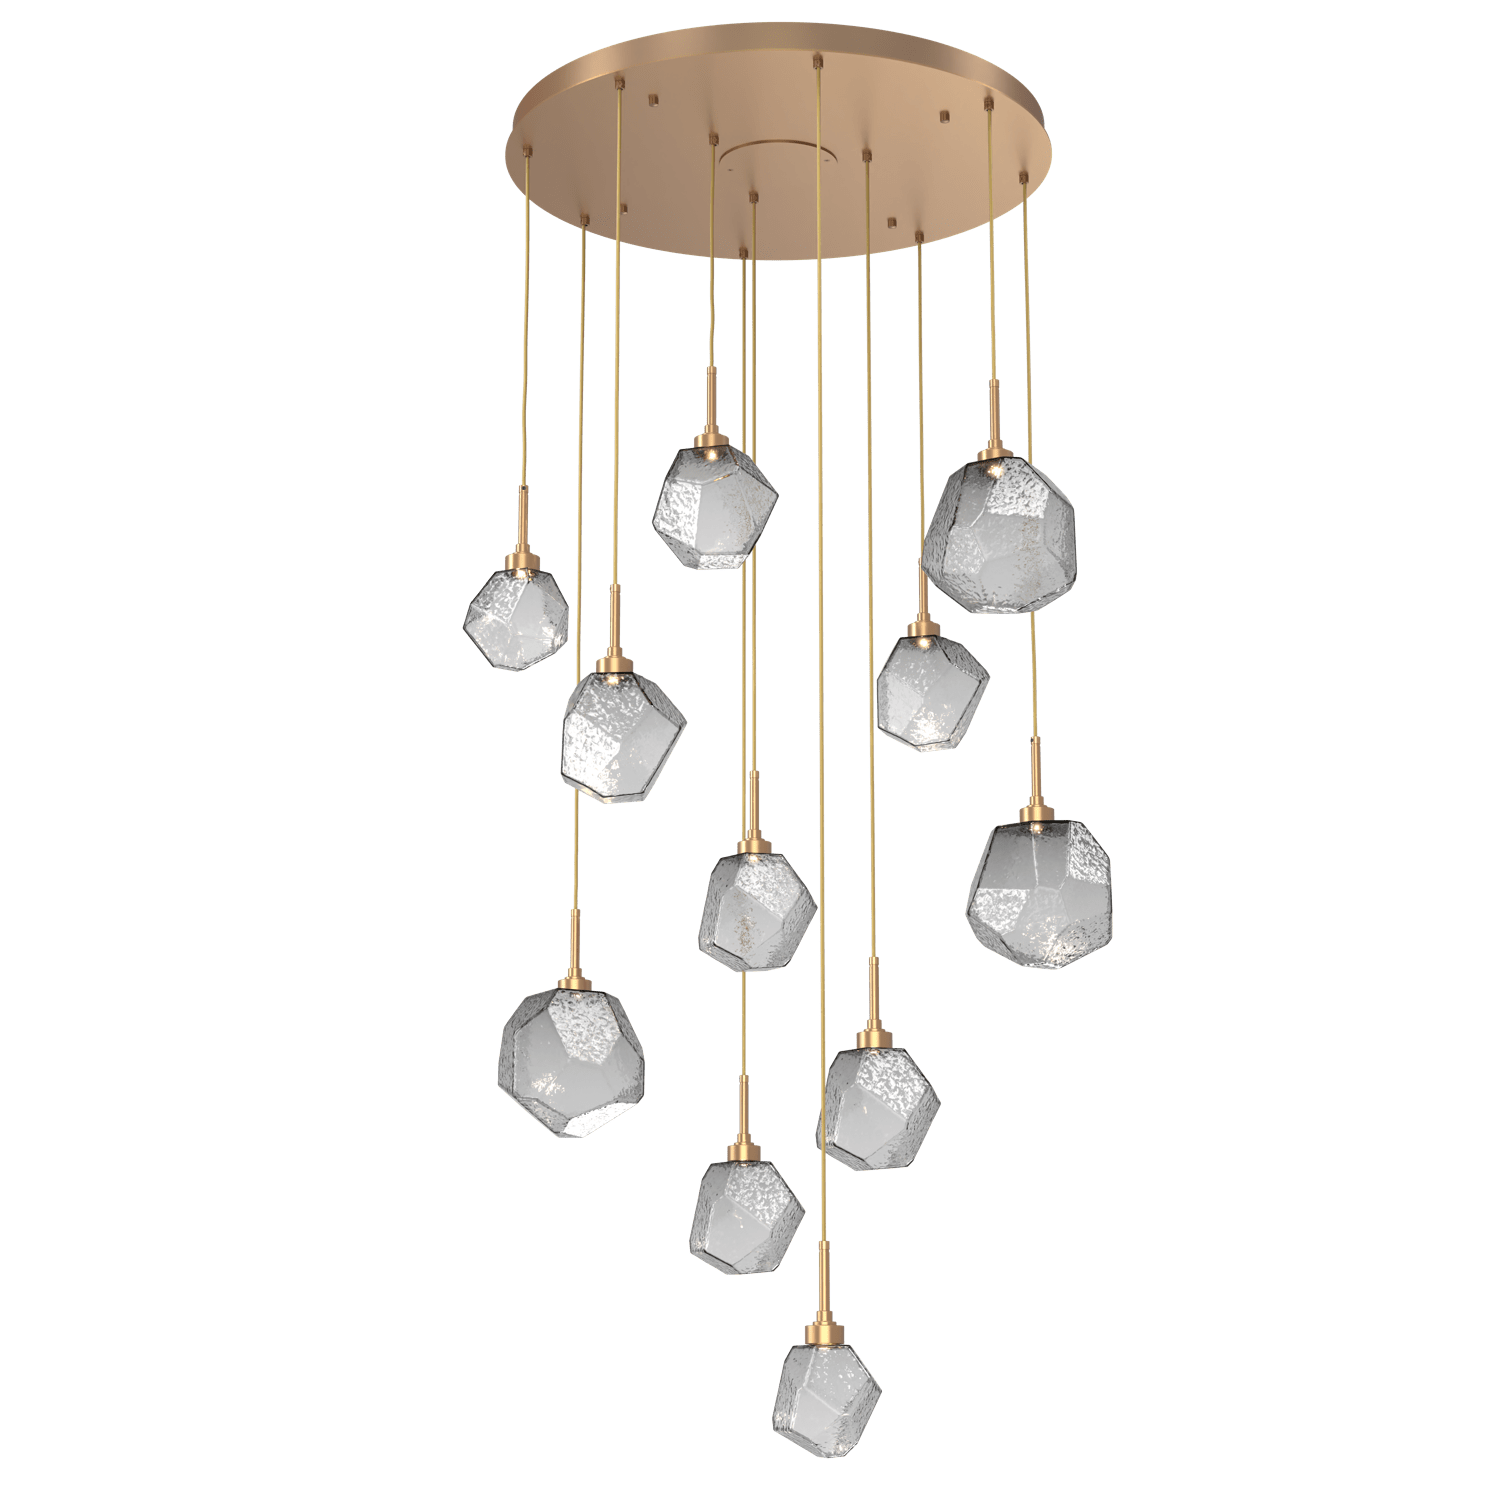 CHB0039-11-NB-S-Hammerton-Studio-Gem-11-light-round-pendant-chandelier-with-novel-brass-finish-and-smoke-blown-glass-shades-and-LED-lamping